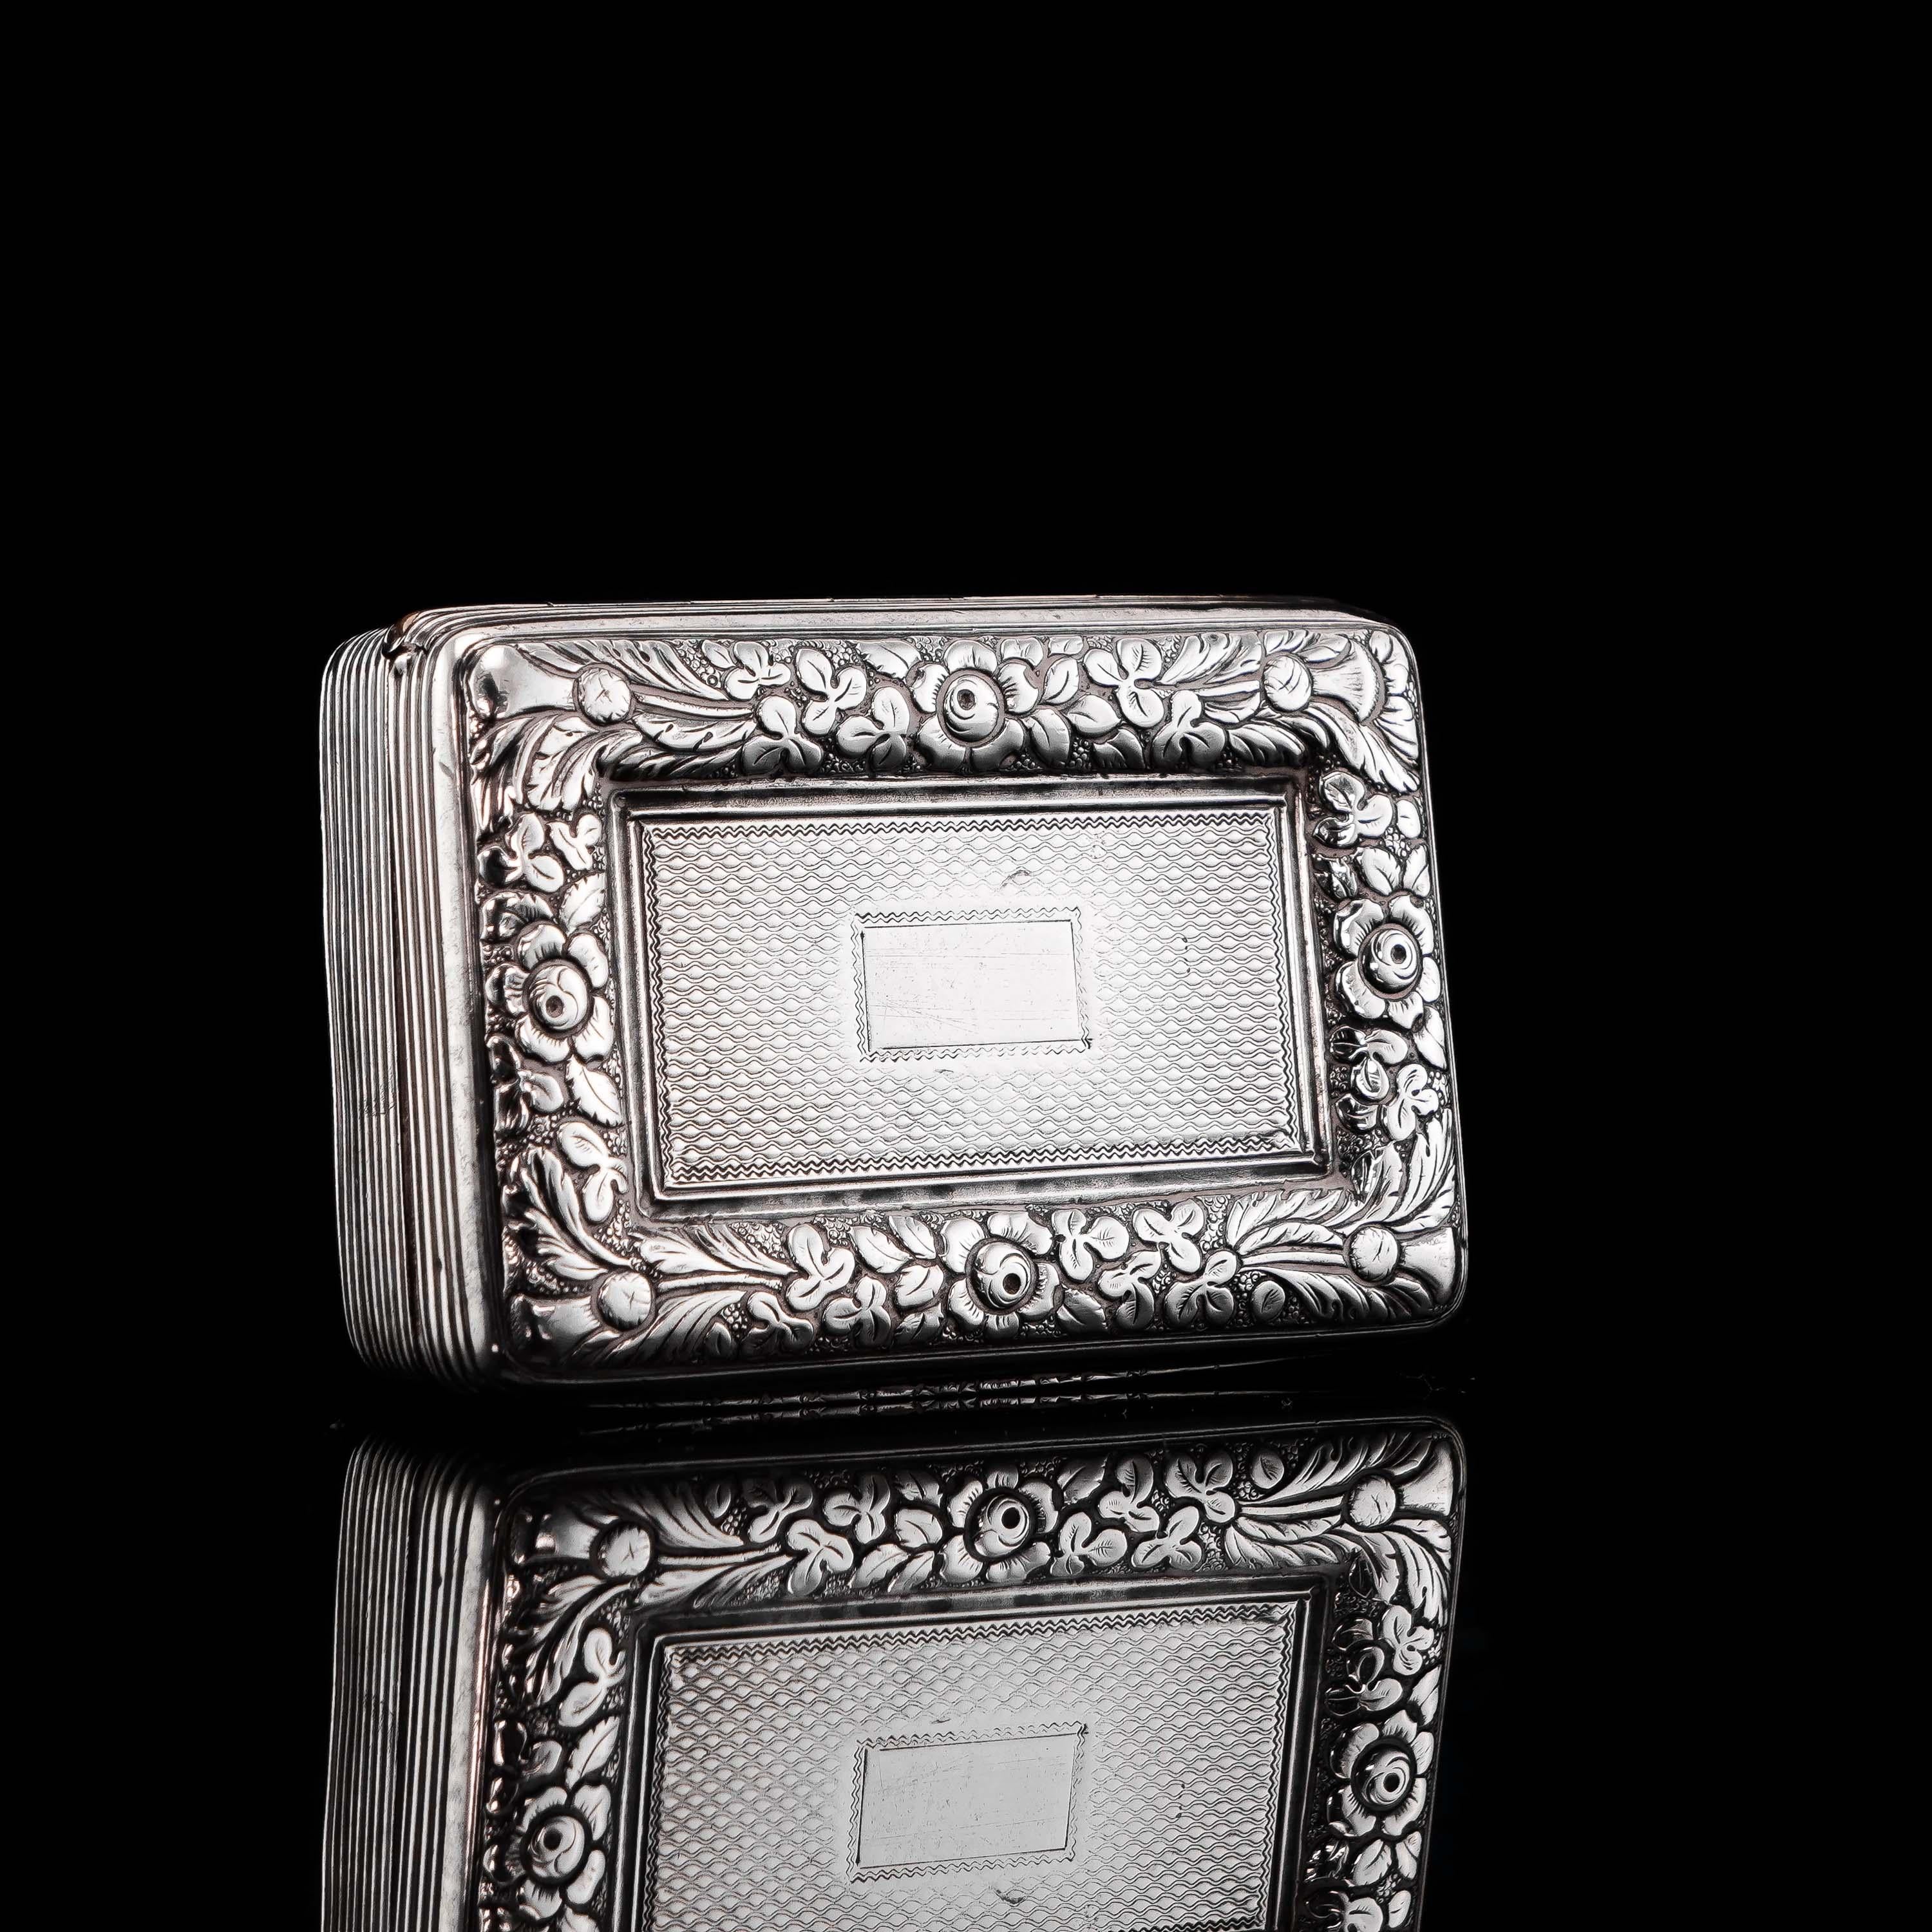 Antique Georgian Silver Snuff Box with Floral Border - Thomas Wilkes Barker 1824 1